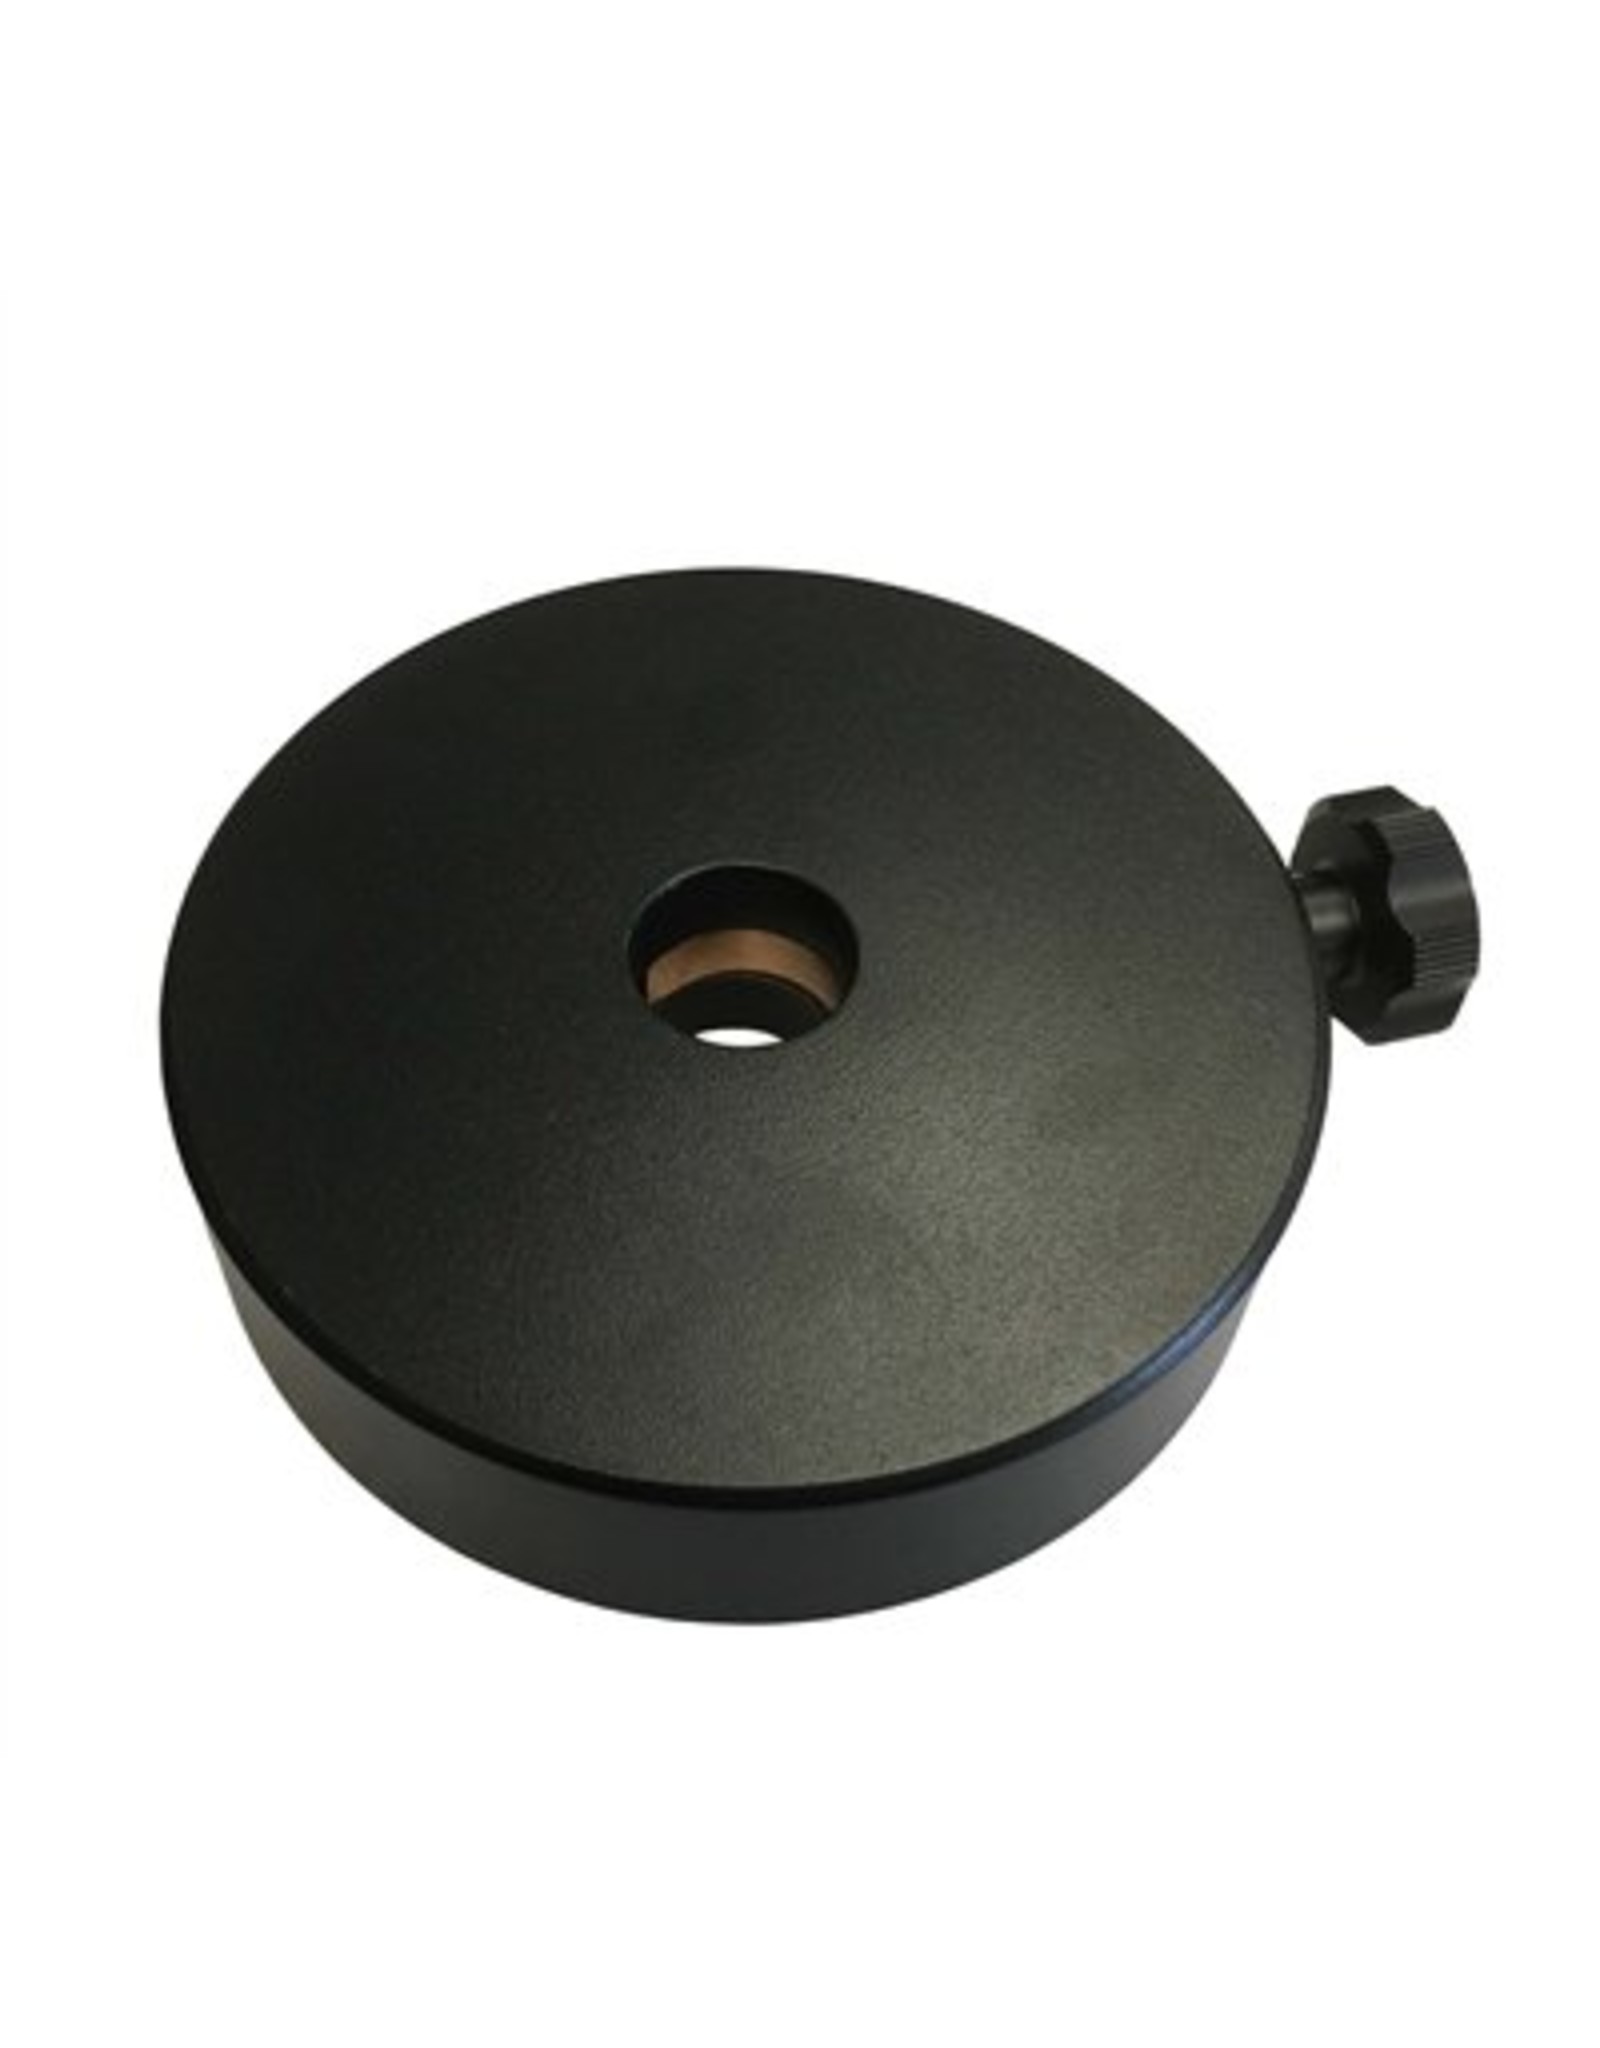 iOptron IOptron 5.0kg (11lb) (28mm Shaft) Counterweight for iEQ45/CEM60/CEM70 or similar